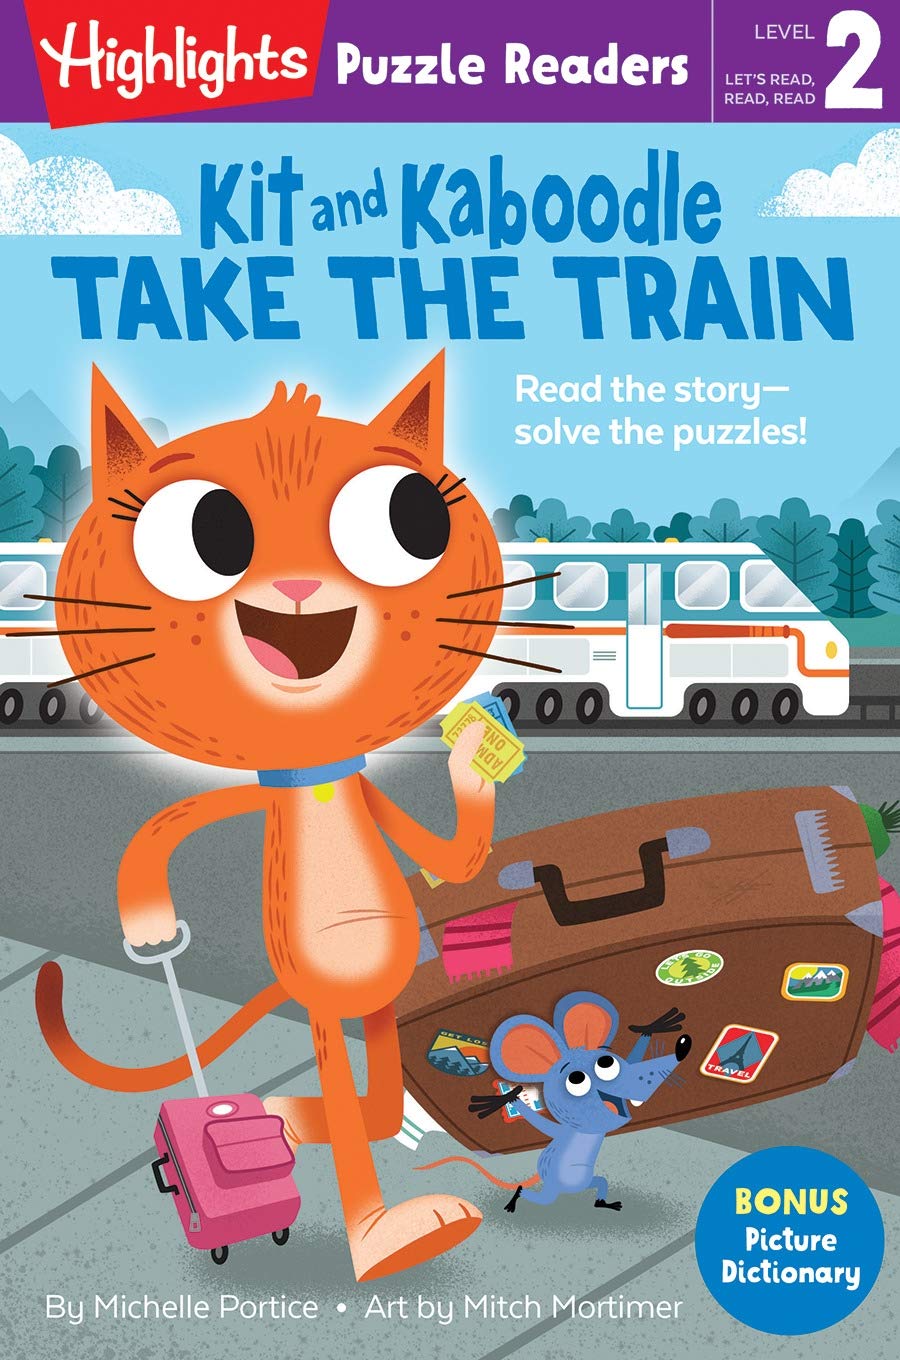 Kit and Kaboodle Take the Train (Highlights Puzzle Readers)